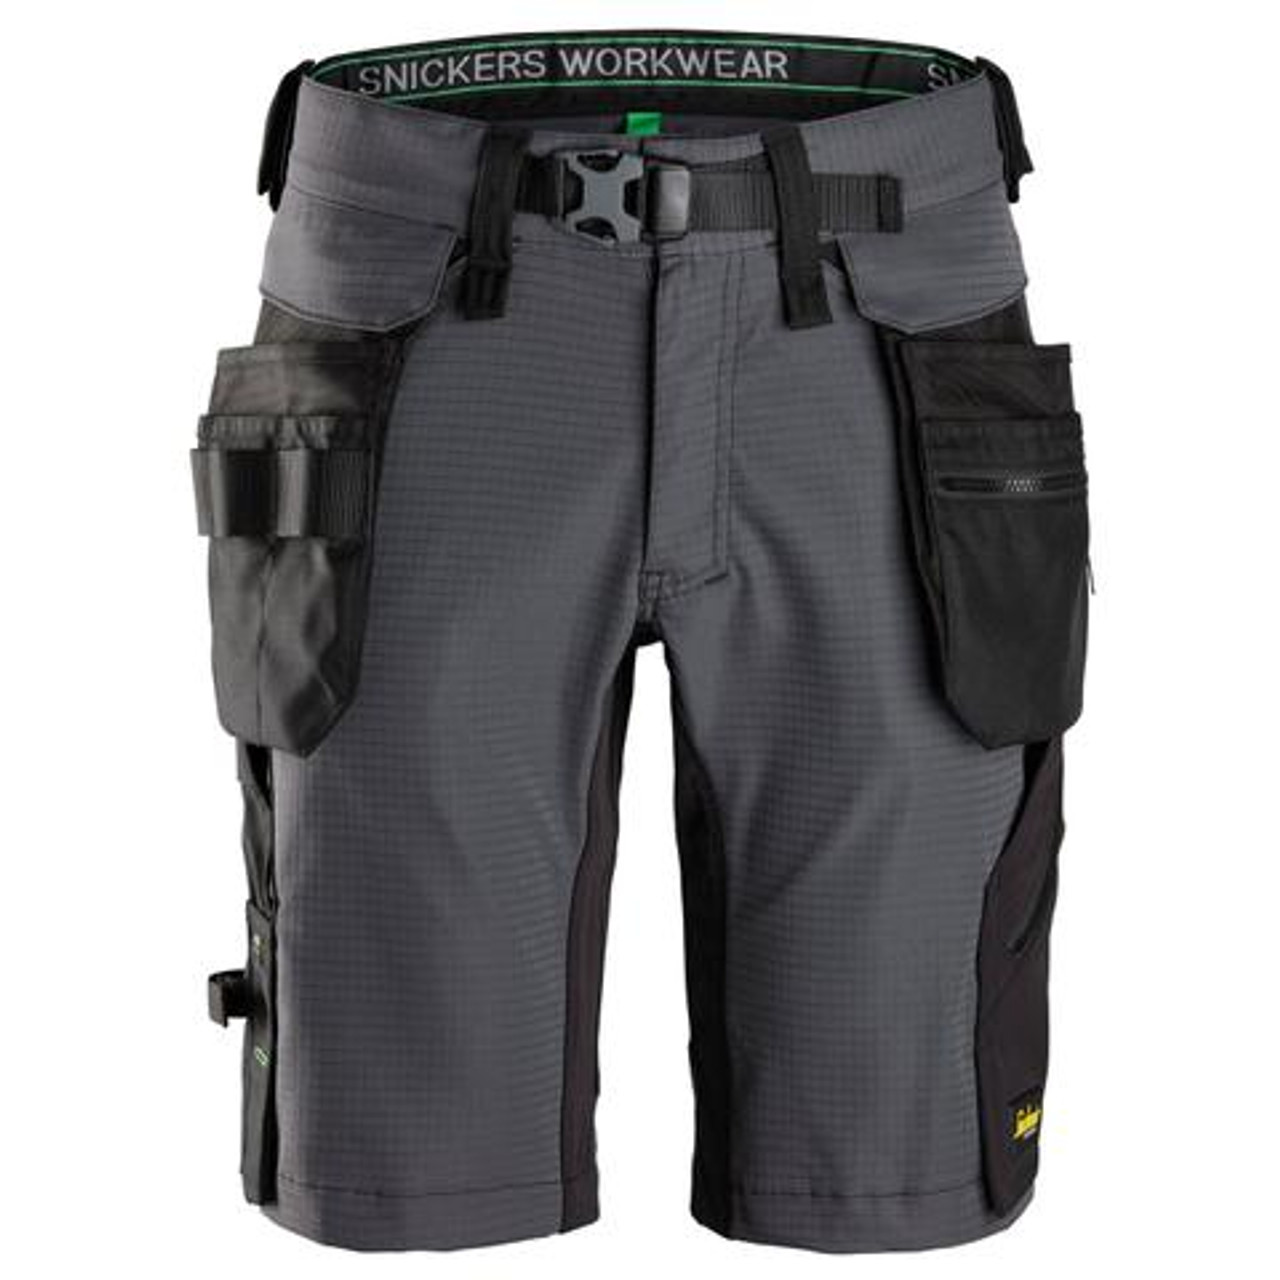 SNICKERS Shorts 6172 with Detachable Holster Pockets  for SNICKERS Shorts | 6172 Flexi Work Mid Grey Shorts with Detachable Holster Pockets 2-Way Stretch that have Configuration available in Electrical